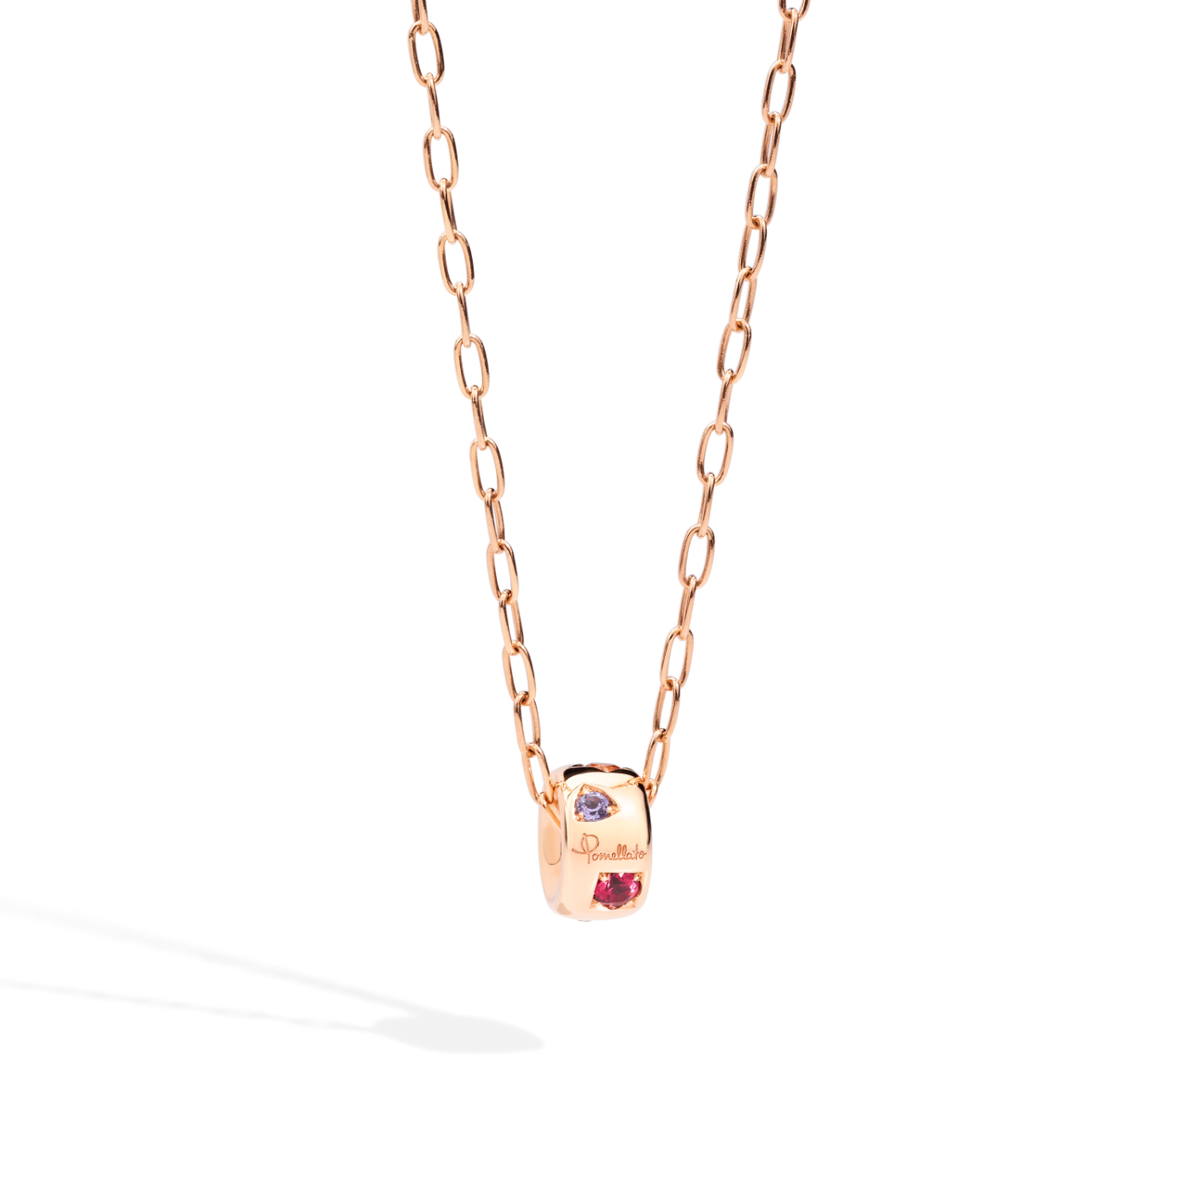 Pomellato Iconica Necklace in 18k Rose Gold with Coloured Gemstones - Orsini Jewellers NZ